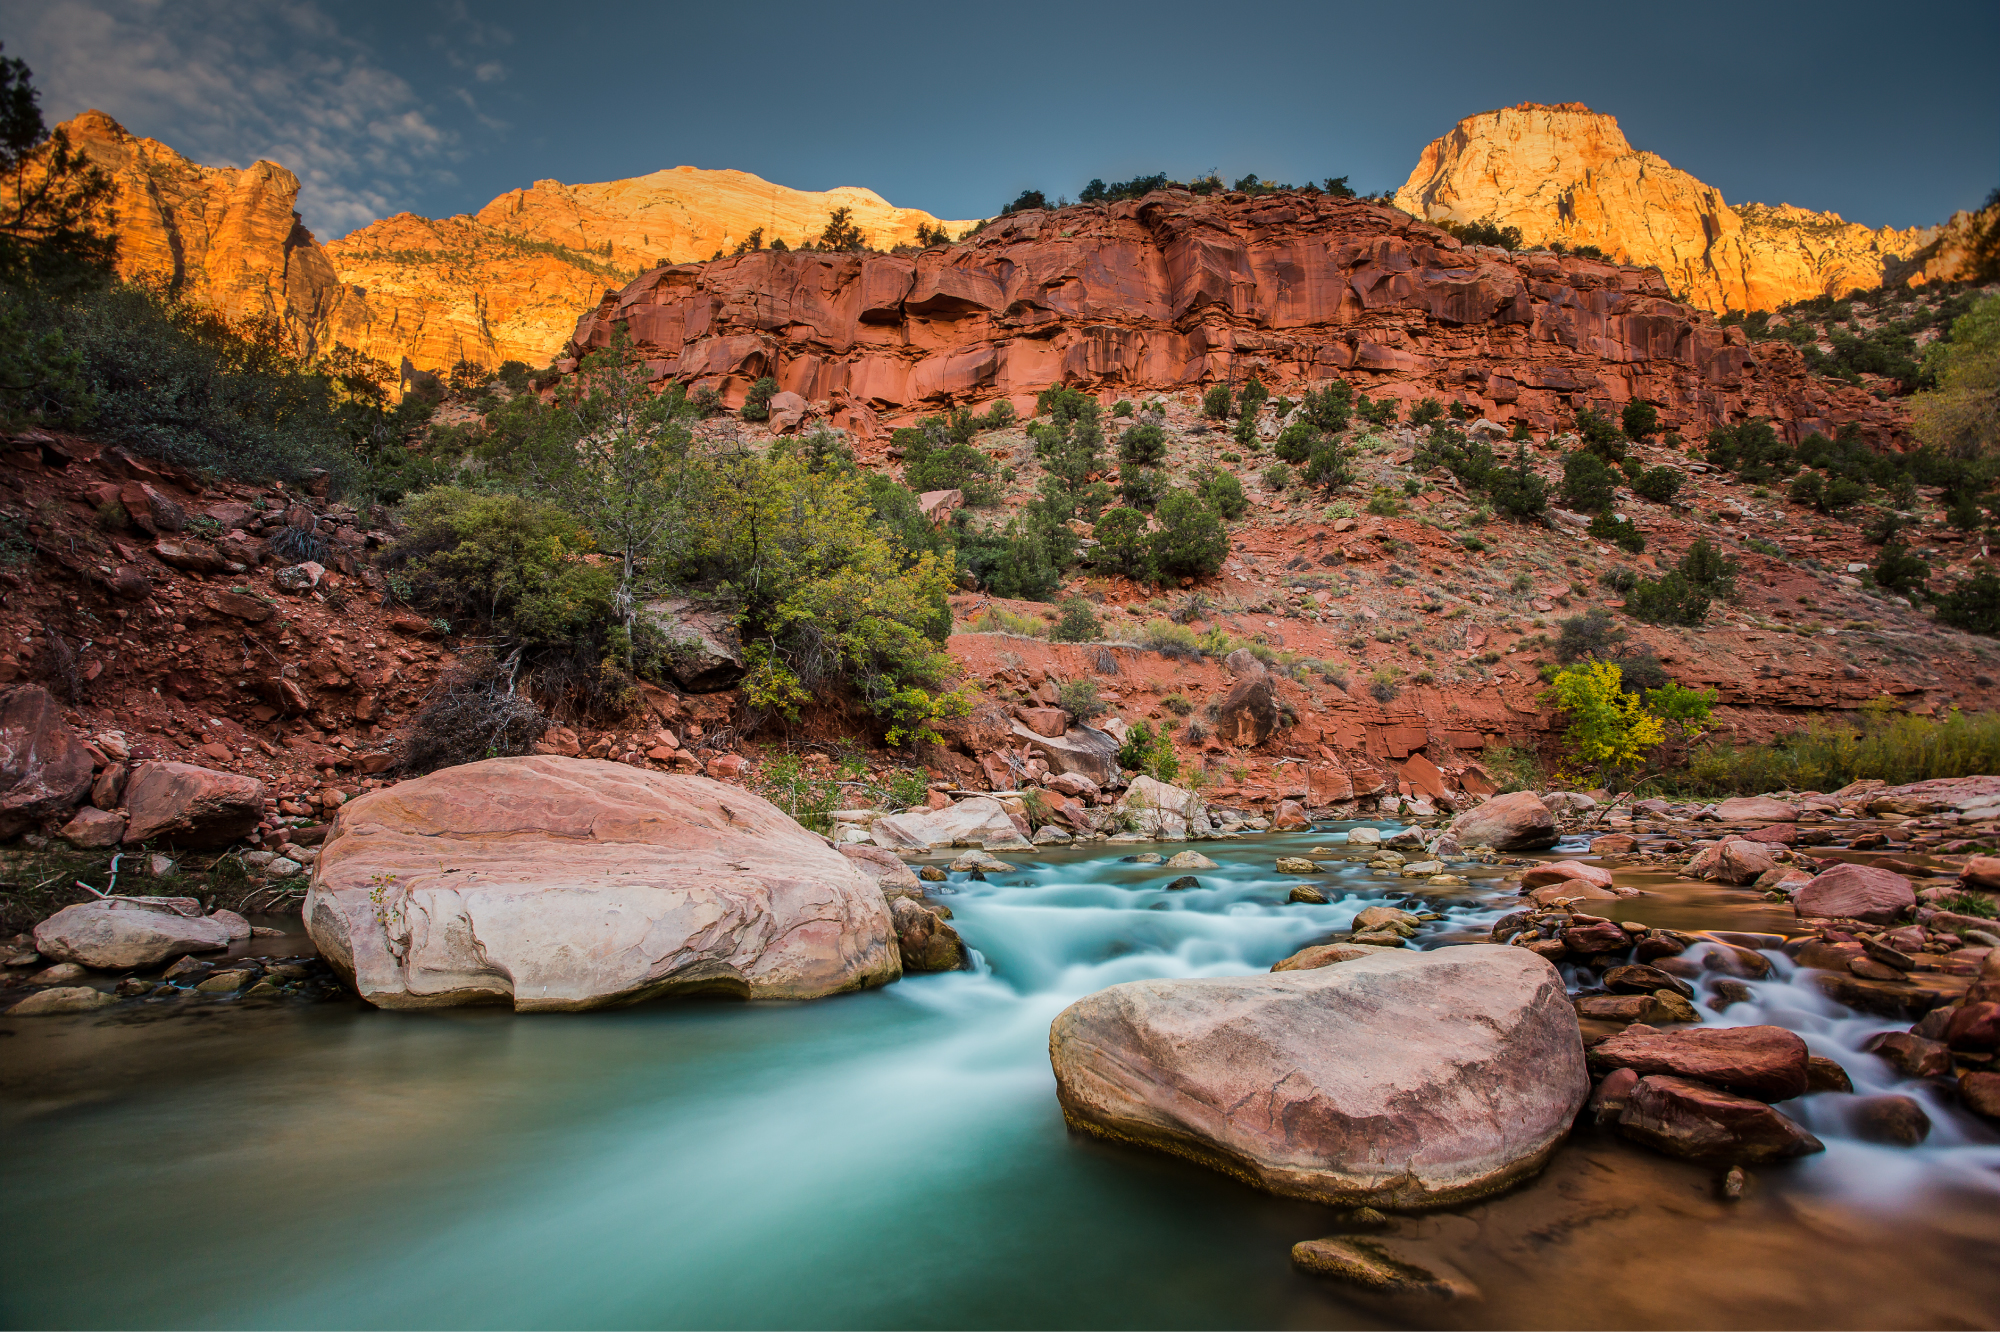 HDR Photography Workshop: Zion River HDR | Pt.3 | RAW Preparation and HDR Export